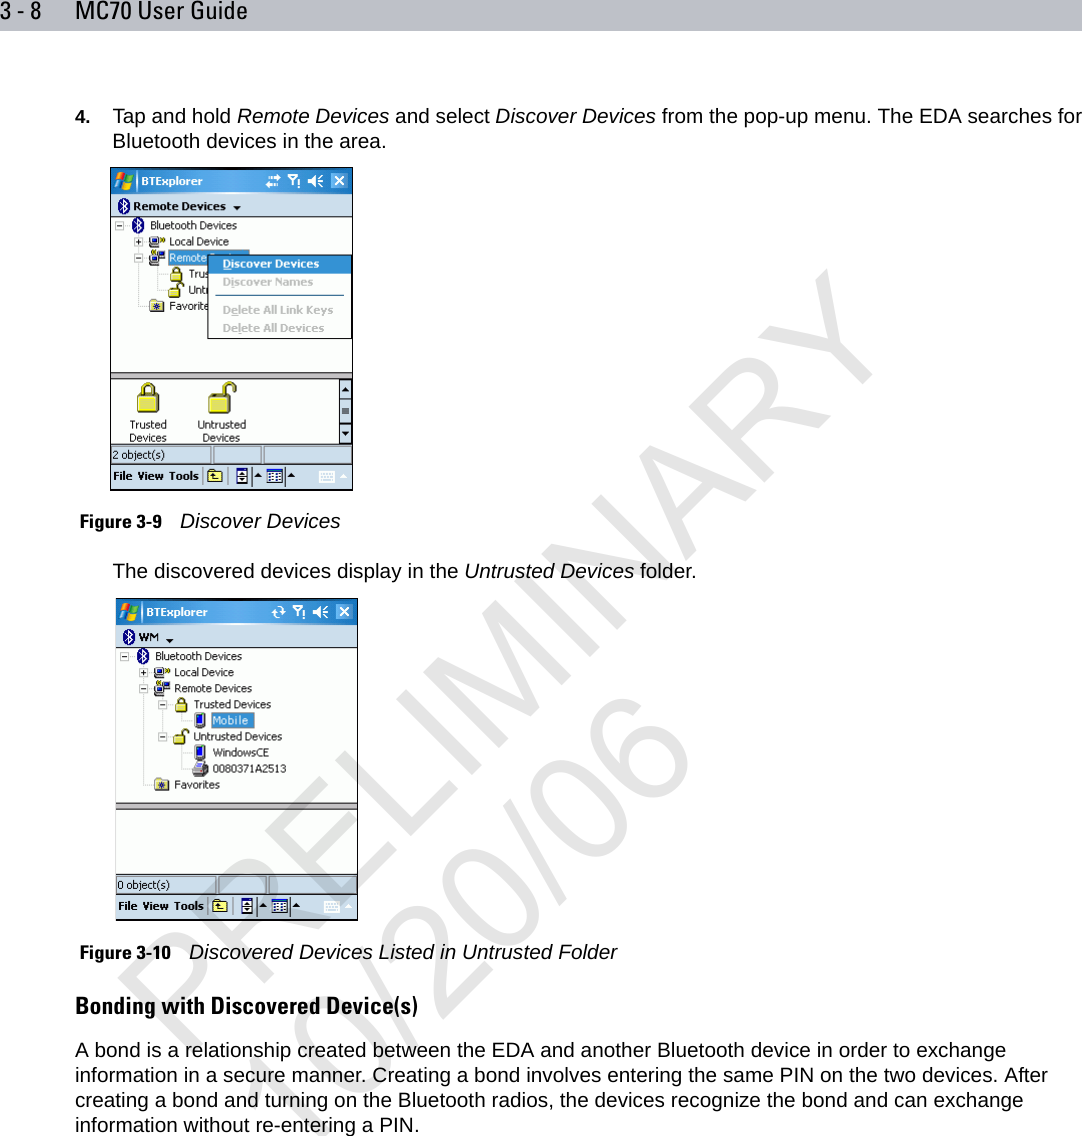 3 - 8 MC70 User Guide4. Tap and hold Remote Devices and select Discover Devices from the pop-up menu. The EDA searches for Bluetooth devices in the area. Figure 3-9    Discover DevicesThe discovered devices display in the Untrusted Devices folder. Figure 3-10    Discovered Devices Listed in Untrusted FolderBonding with Discovered Device(s)A bond is a relationship created between the EDA and another Bluetooth device in order to exchange information in a secure manner. Creating a bond involves entering the same PIN on the two devices. After creating a bond and turning on the Bluetooth radios, the devices recognize the bond and can exchange information without re-entering a PIN.PRELIMINARY10/20/06